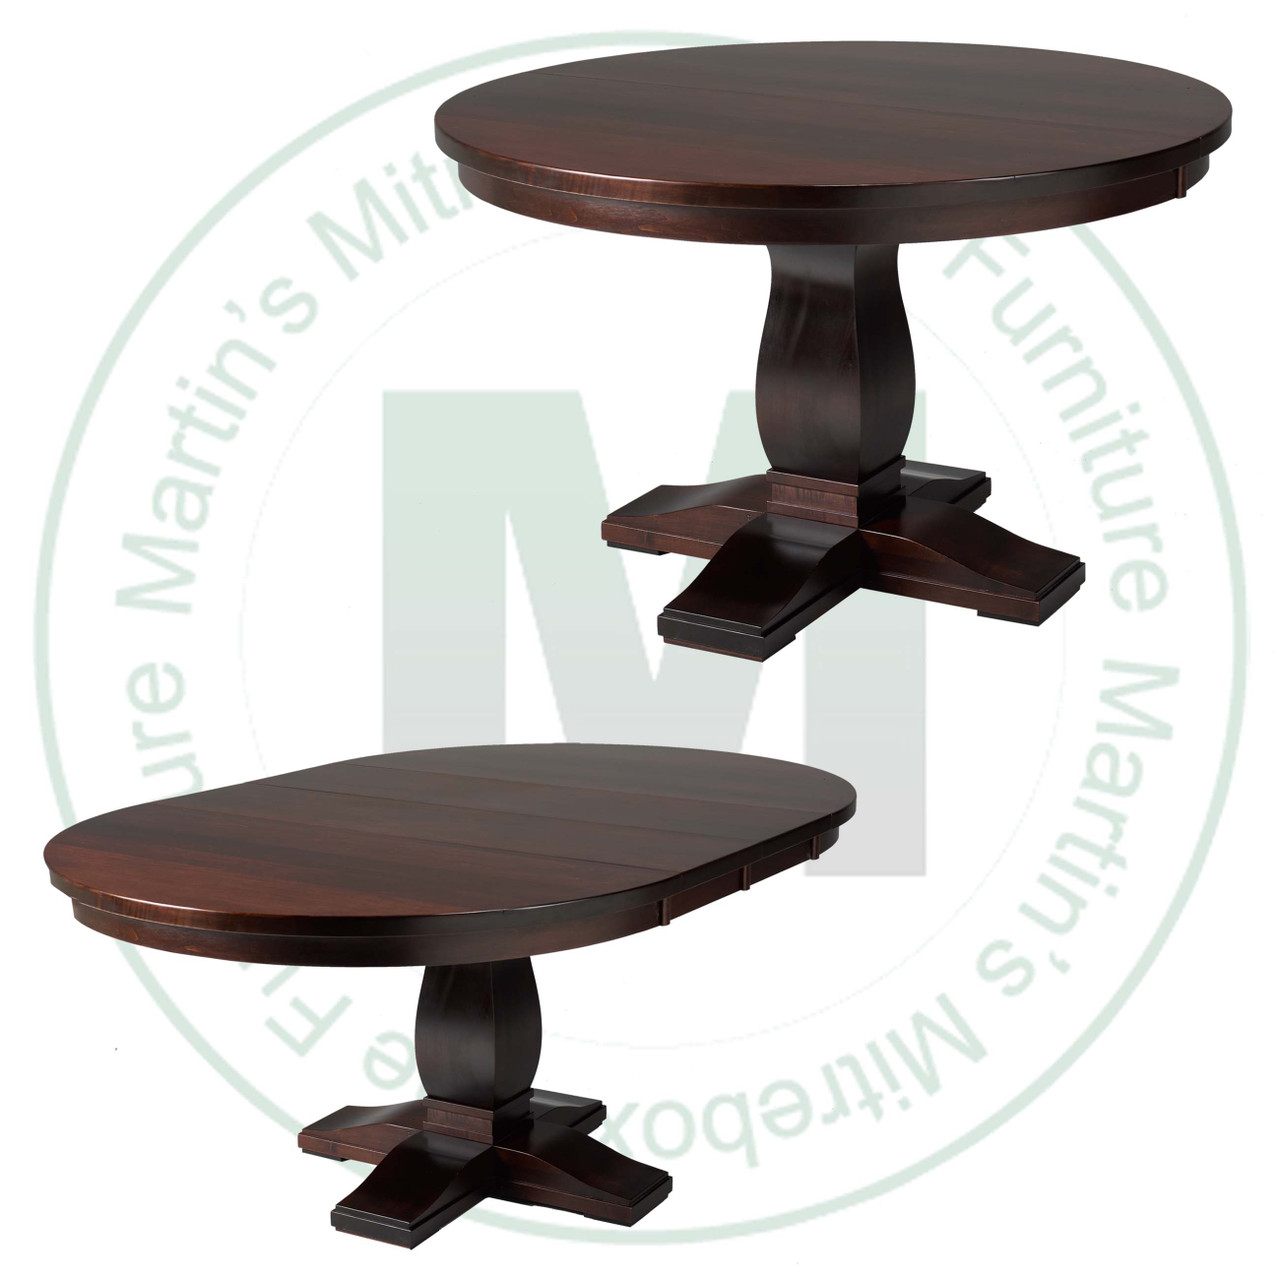 Oak Valencia Single Pedestal Table 60''D x 60''W x 30''H With 2 - 12'' Leaves Table. Table Has 1'' Thick Top.